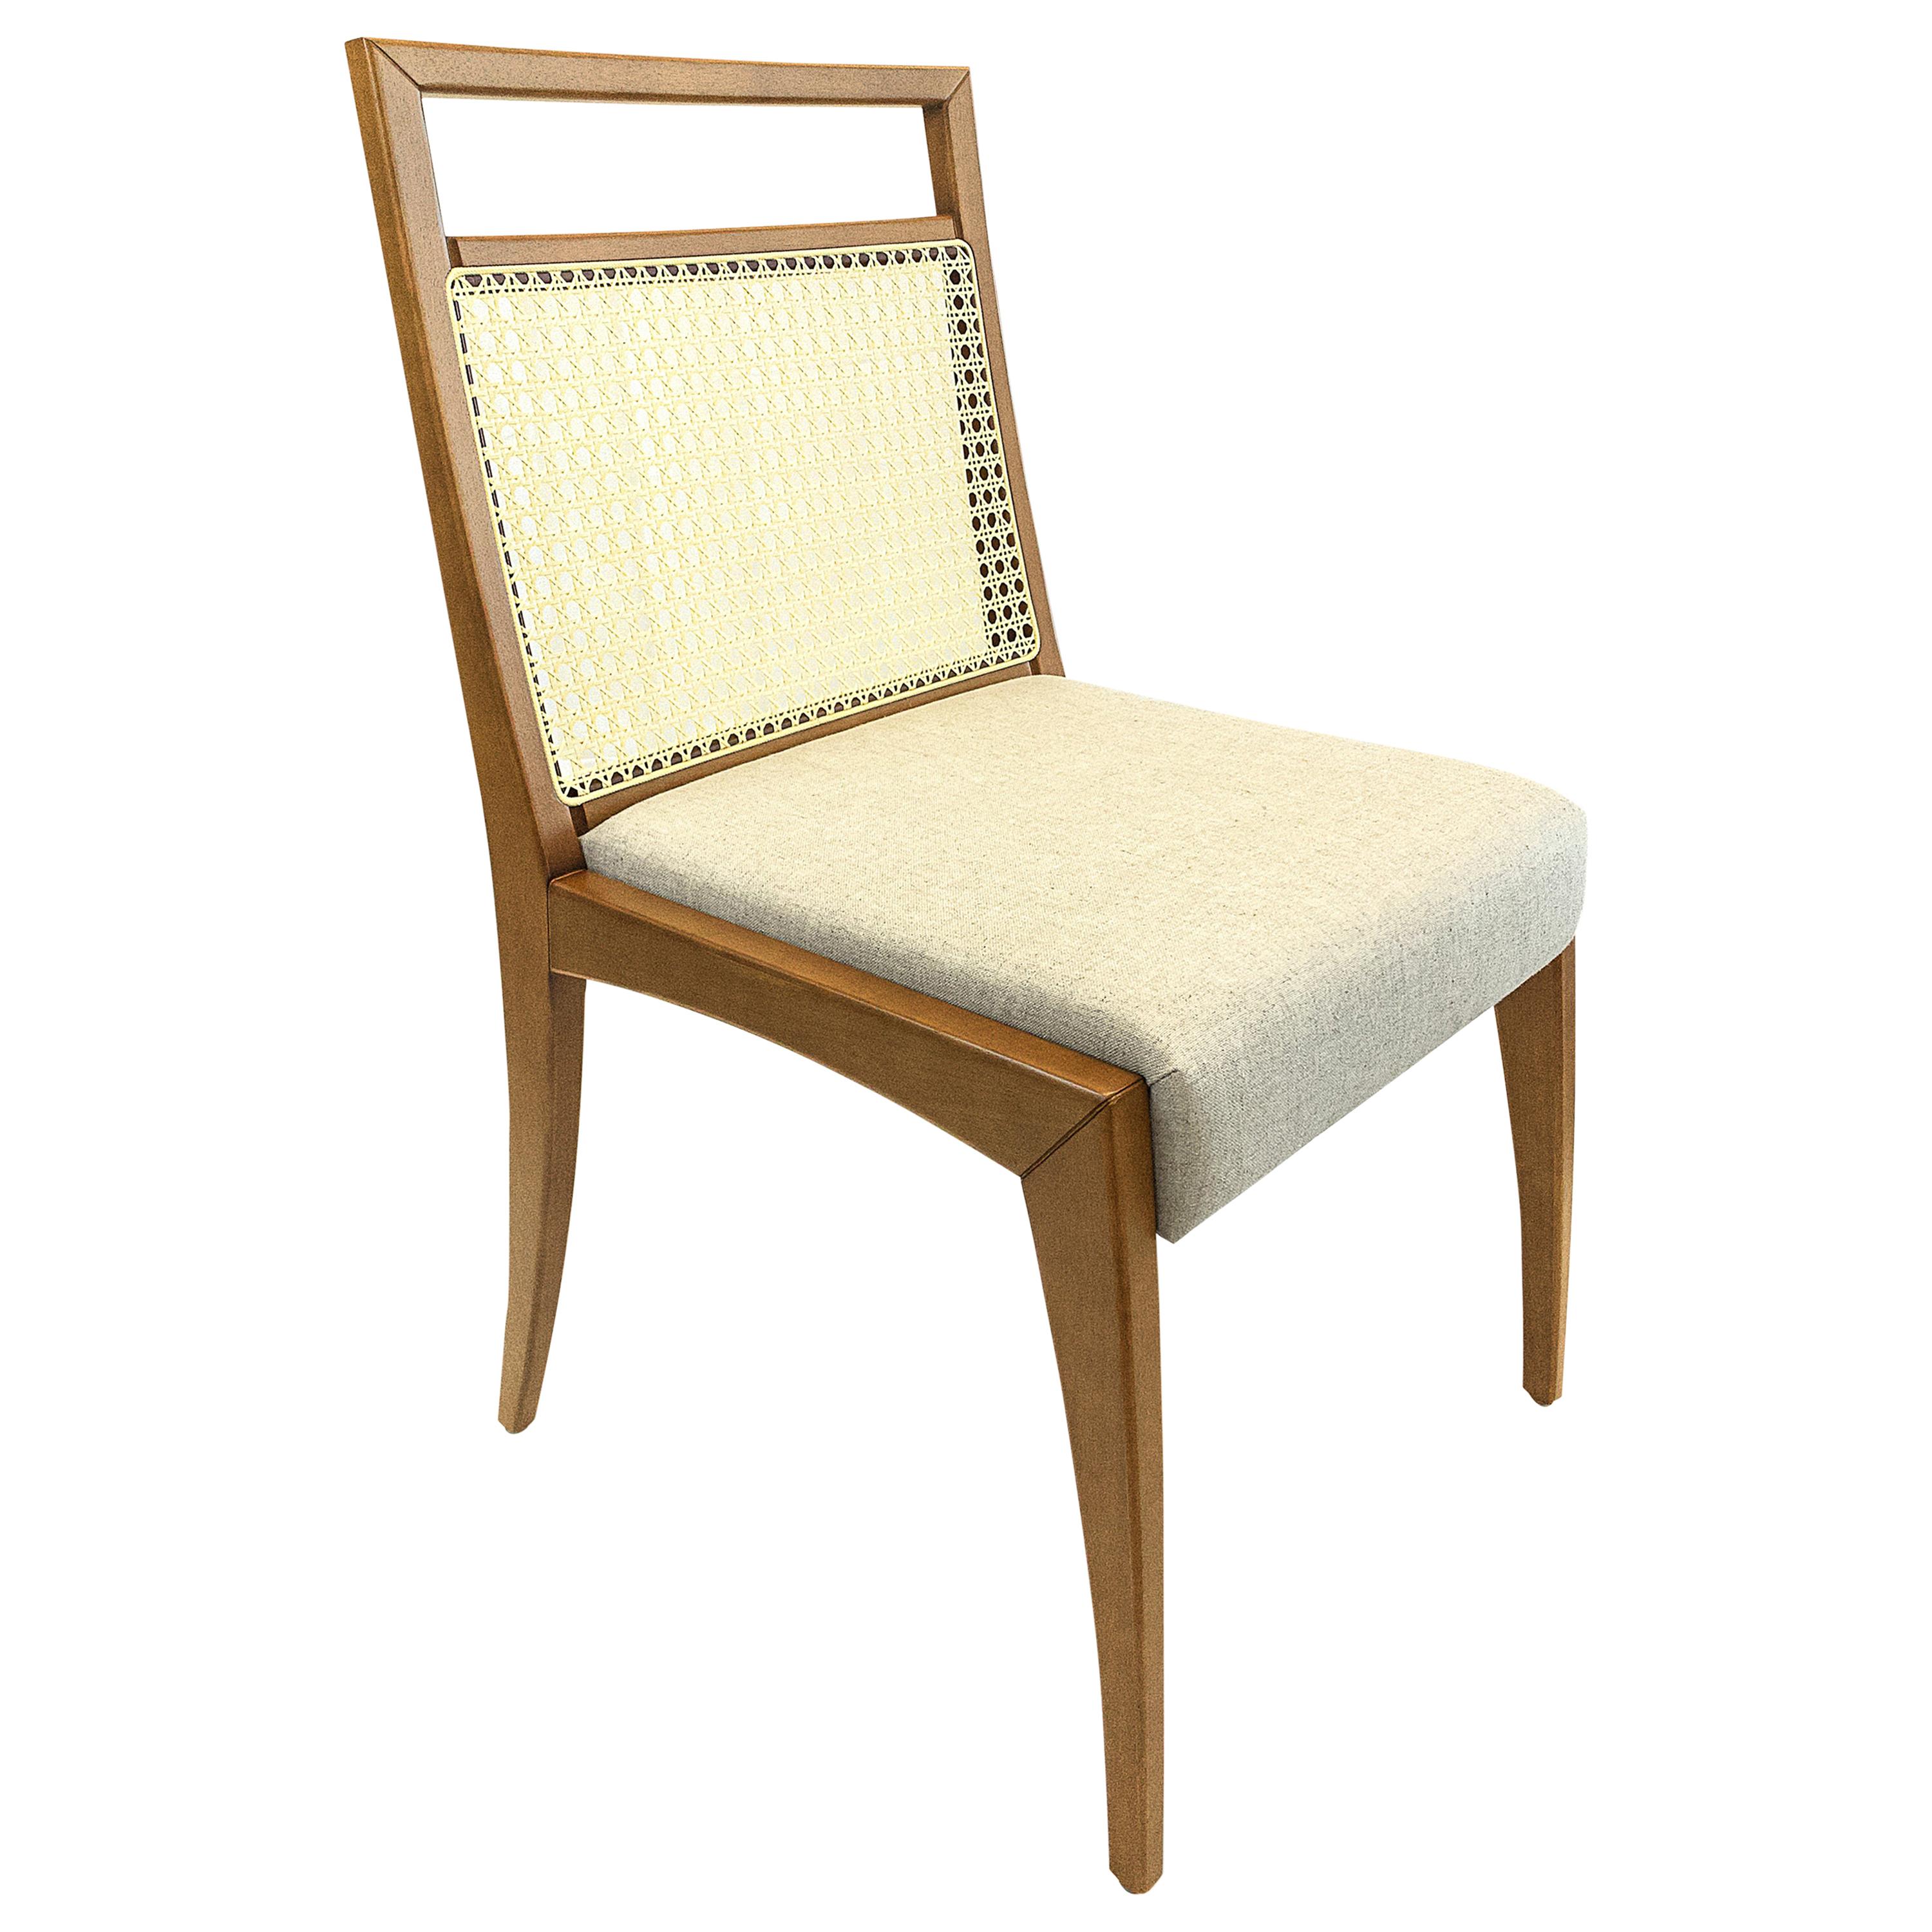 The sotto is a solid wood dining chair frame featuring a stunning cane-backing partnered with an open top rail. 